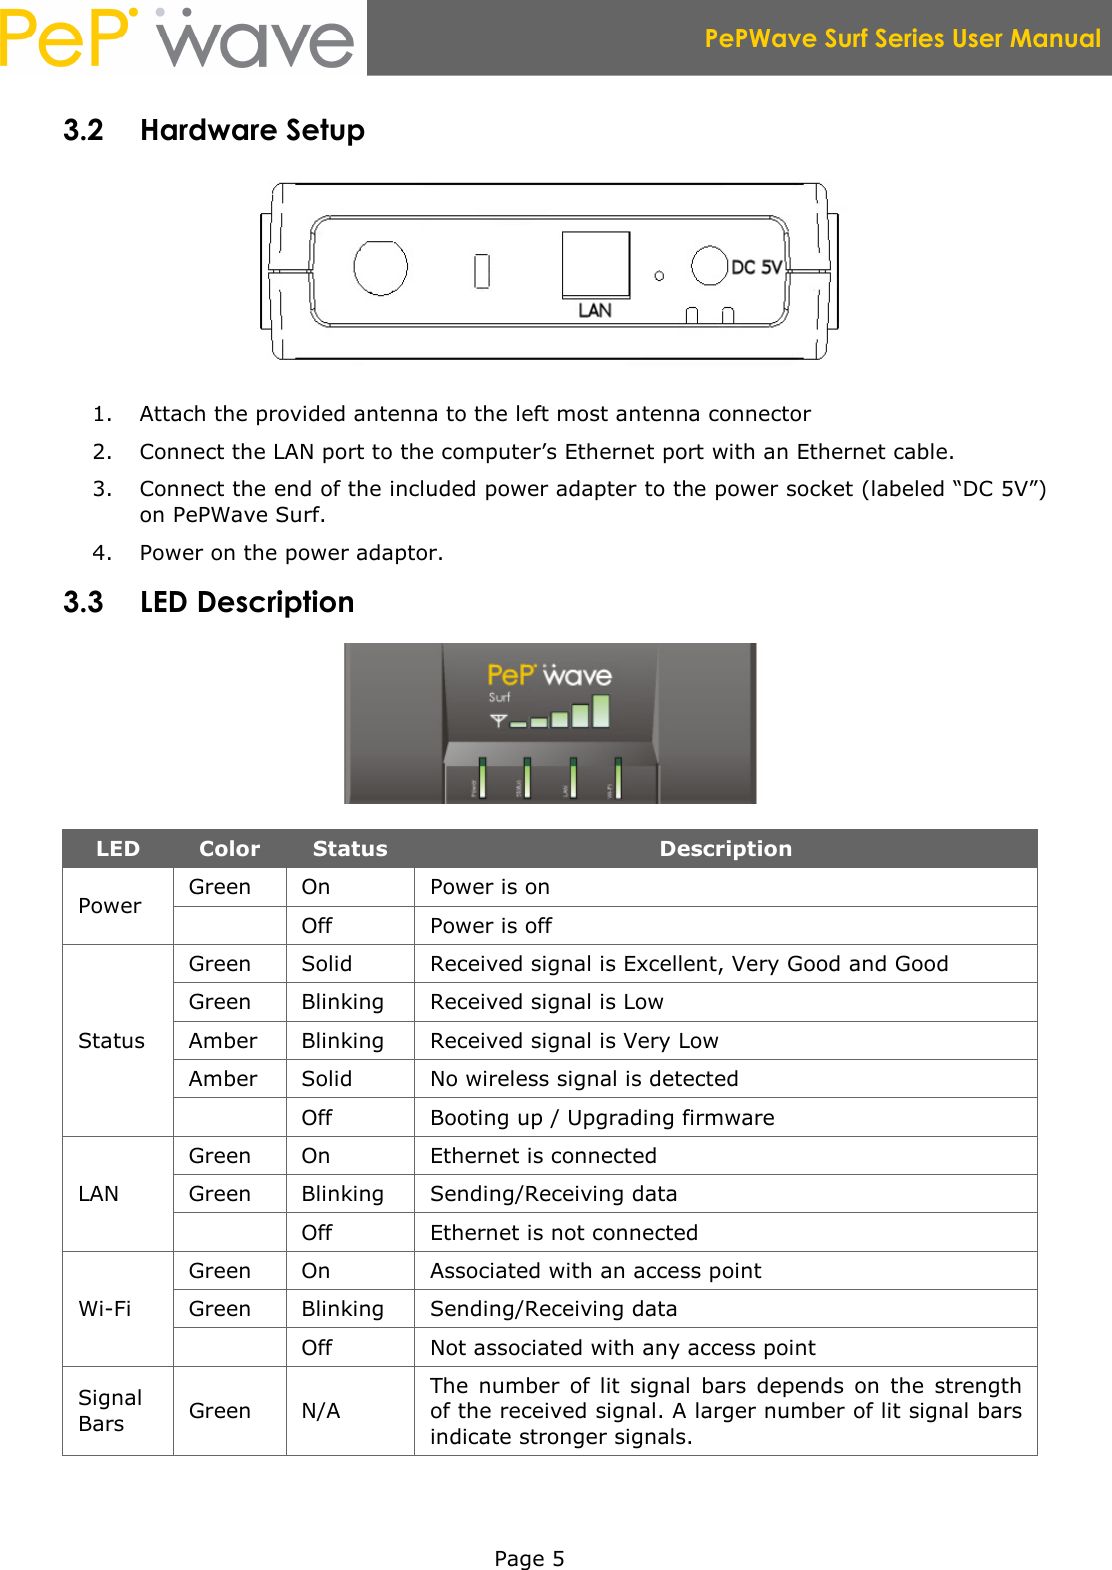  PePWave Surf Series User Manual   Page 5 3.2 Hardware Setup  1. Attach the provided antenna to the left most antenna connector 2. Connect the LAN port to the computer’s Ethernet port with an Ethernet cable. 3. Connect the end of the included power adapter to the power socket (labeled “DC 5V”) on PePWave Surf. 4. Power on the power adaptor. 3.3 LED Description  LED  Color  Status  Description Green  On  Power is on Power    Off  Power is off Green  Solid  Received signal is Excellent, Very Good and Good Green  Blinking  Received signal is Low Amber  Blinking  Received signal is Very Low Amber  Solid  No wireless signal is detected Status   Off  Booting up / Upgrading firmware Green  On  Ethernet is connected Green  Blinking  Sending/Receiving data LAN   Off  Ethernet is not connected Green  On  Associated with an access point Green  Blinking  Sending/Receiving data Wi-Fi   Off  Not associated with any access point Signal Bars  Green  N/A The  number  of  lit  signal  bars  depends  on  the  strength of the received signal. A larger number of lit signal bars indicate stronger signals. 